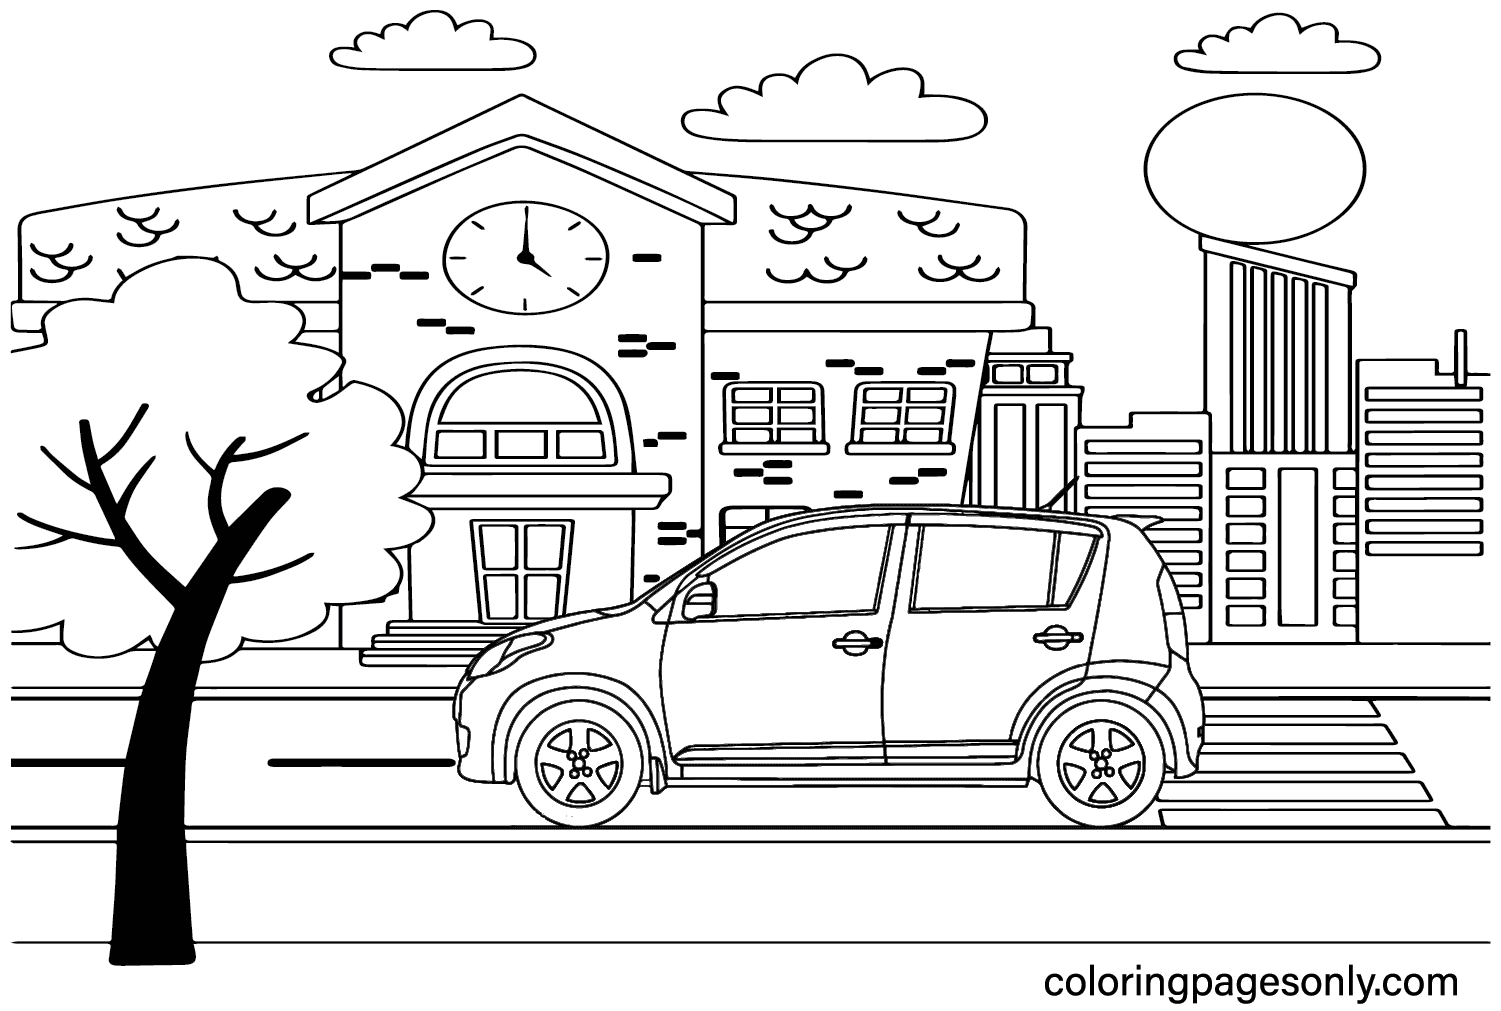 Coloring Page Perodua Myvi Hatchback - Free Printable Coloring Pages